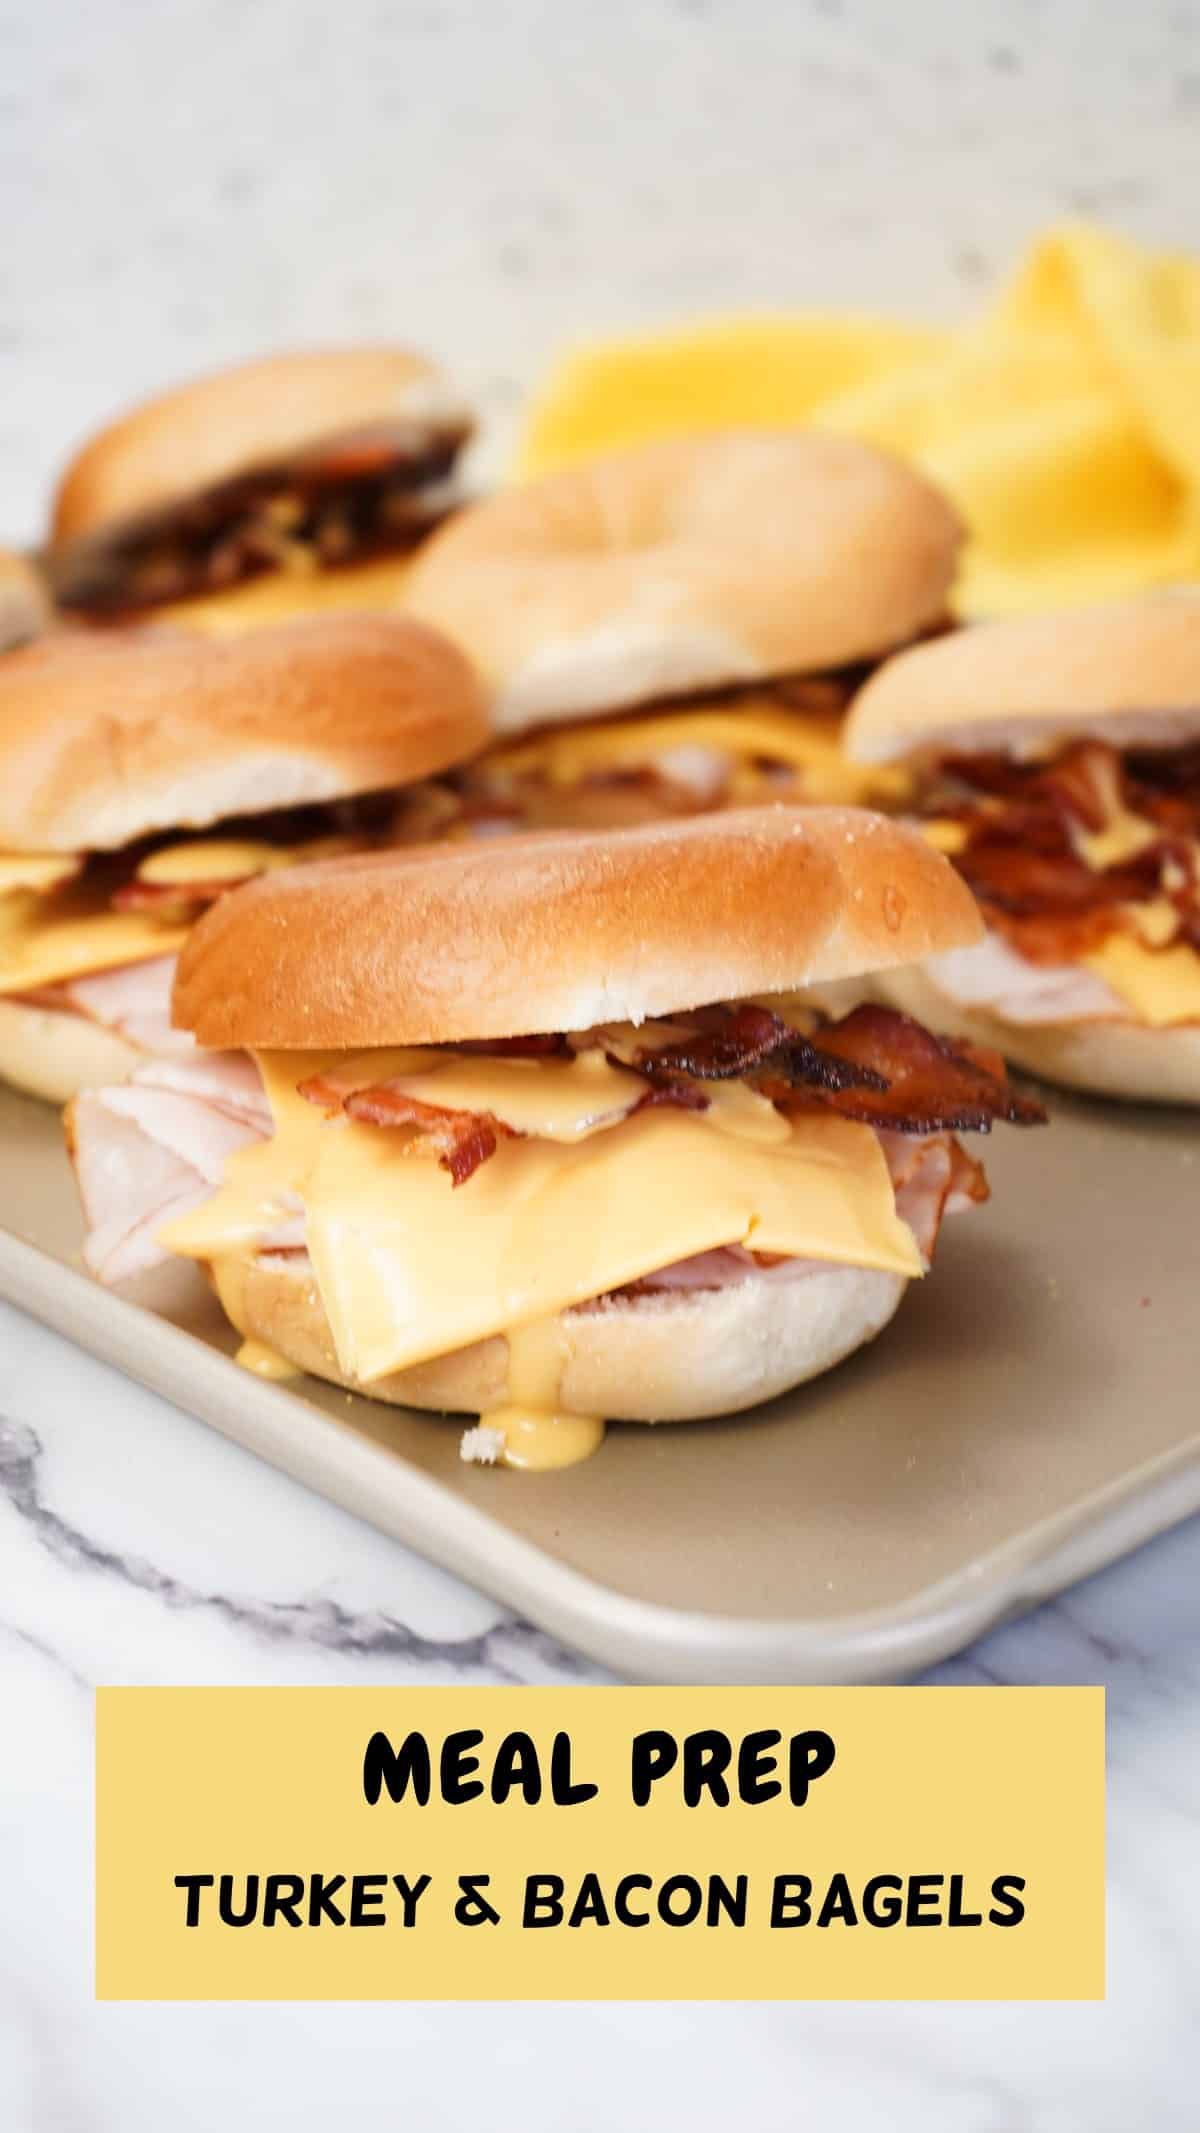 Meal prep bacon and turkey bagels with text